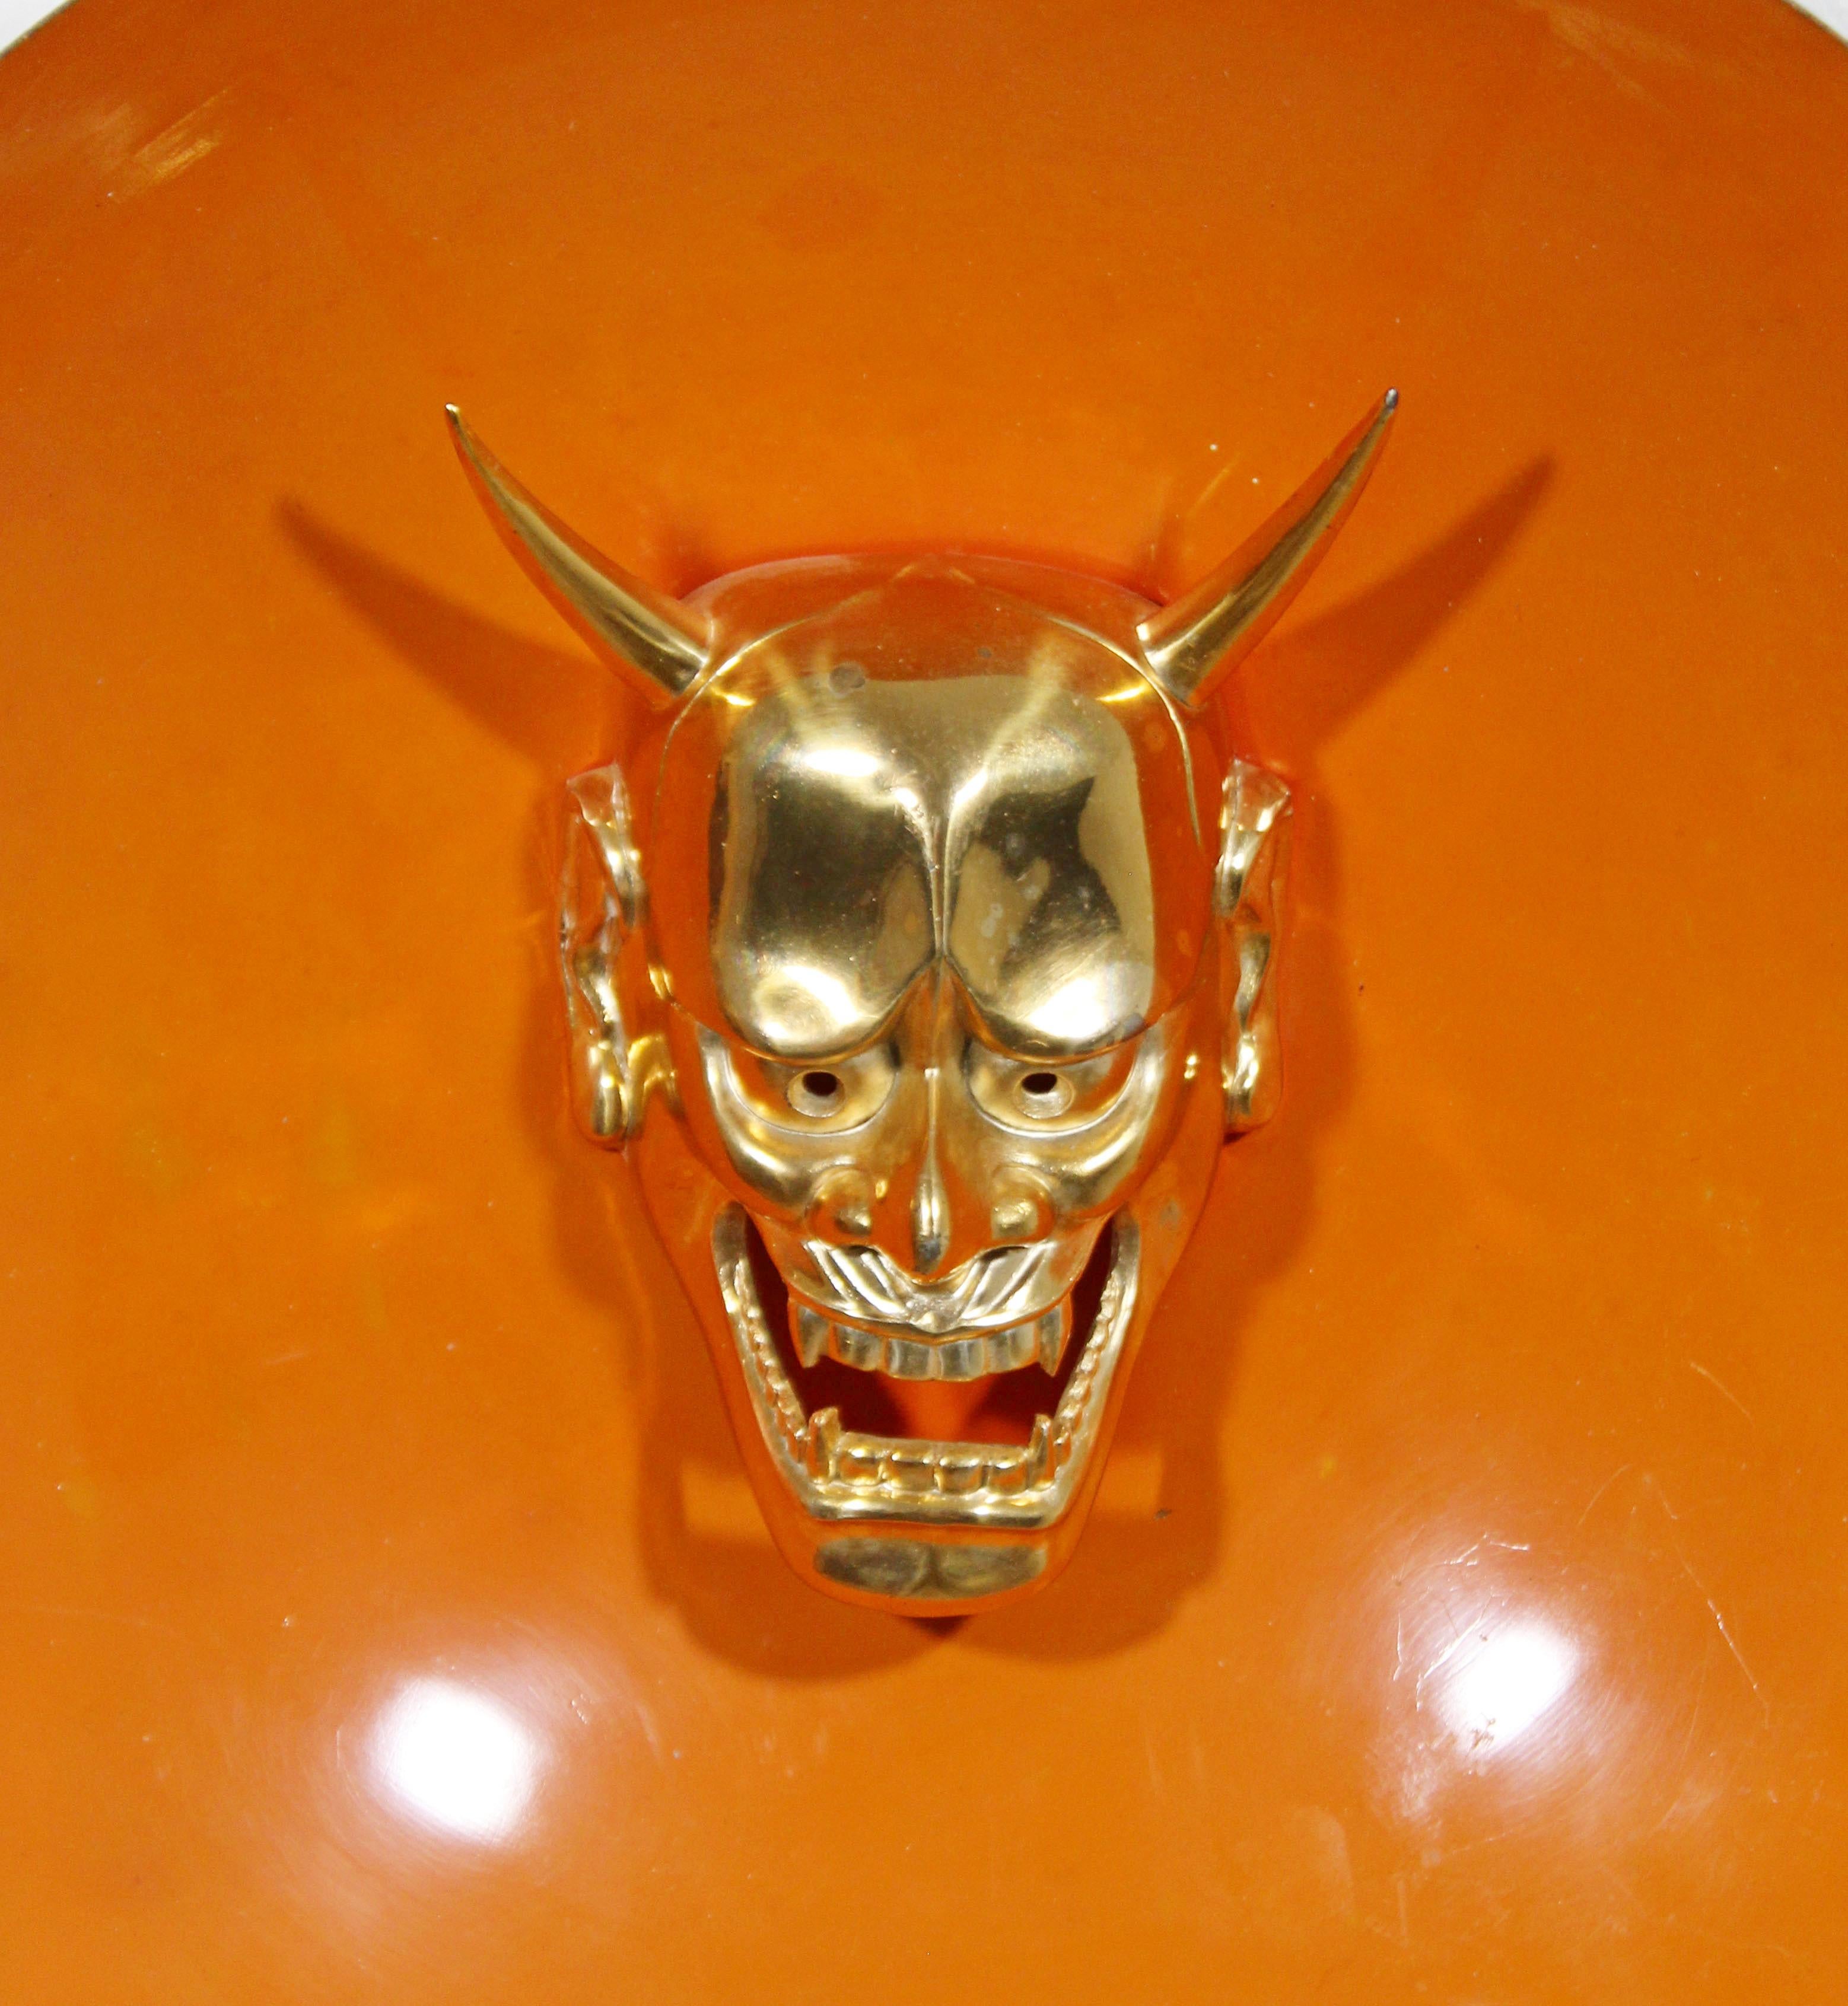 For your consideration is a brilliant, enamel dish wall sculpture, with a gold gilt Devil's head, circa 1970s. In very good vintage condition. The dimensions are 11